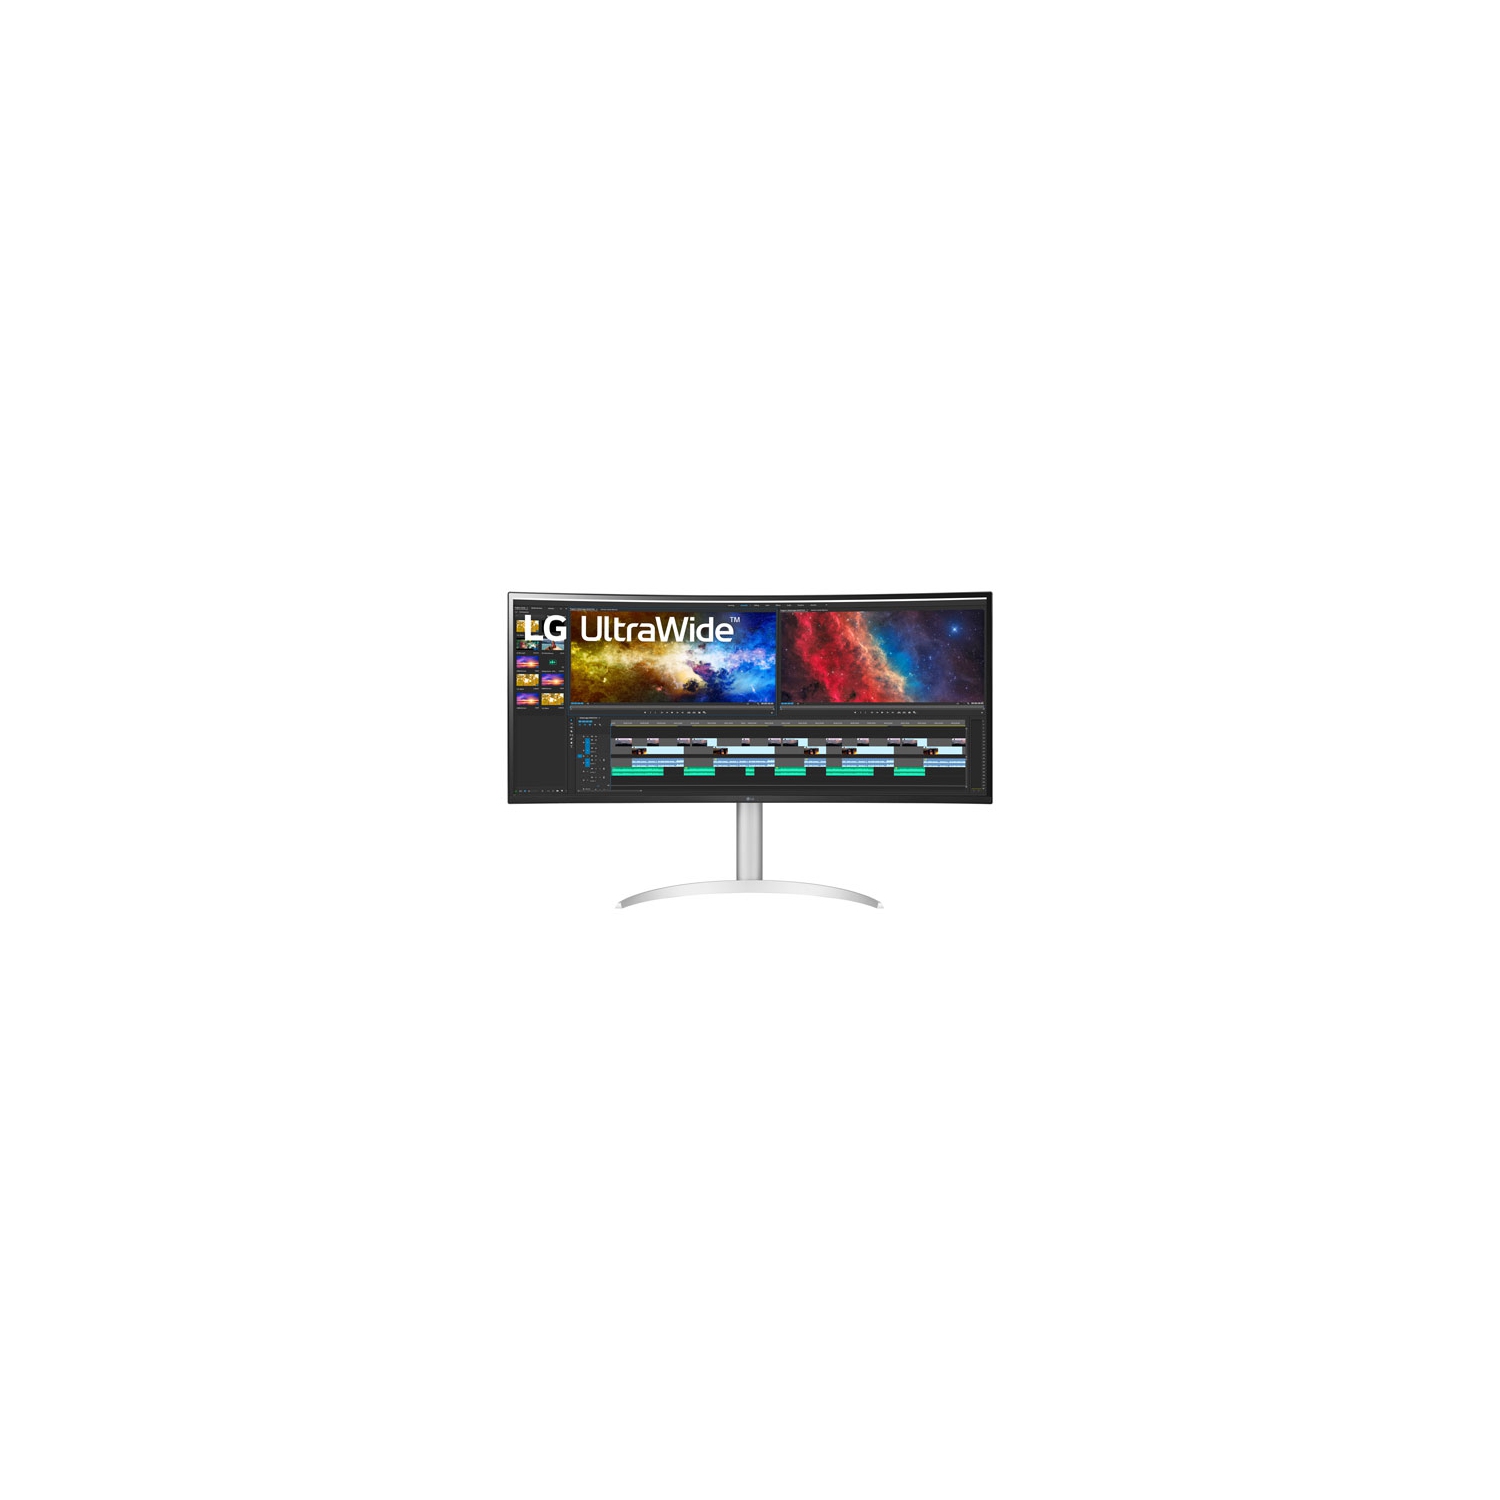 Refurbished (Excellent) - LG UltraWide 38" 1440p WQHD 75Hz 5ms GTG Curved IPS LED FreeSync Monitor (38WP85C-W) - White